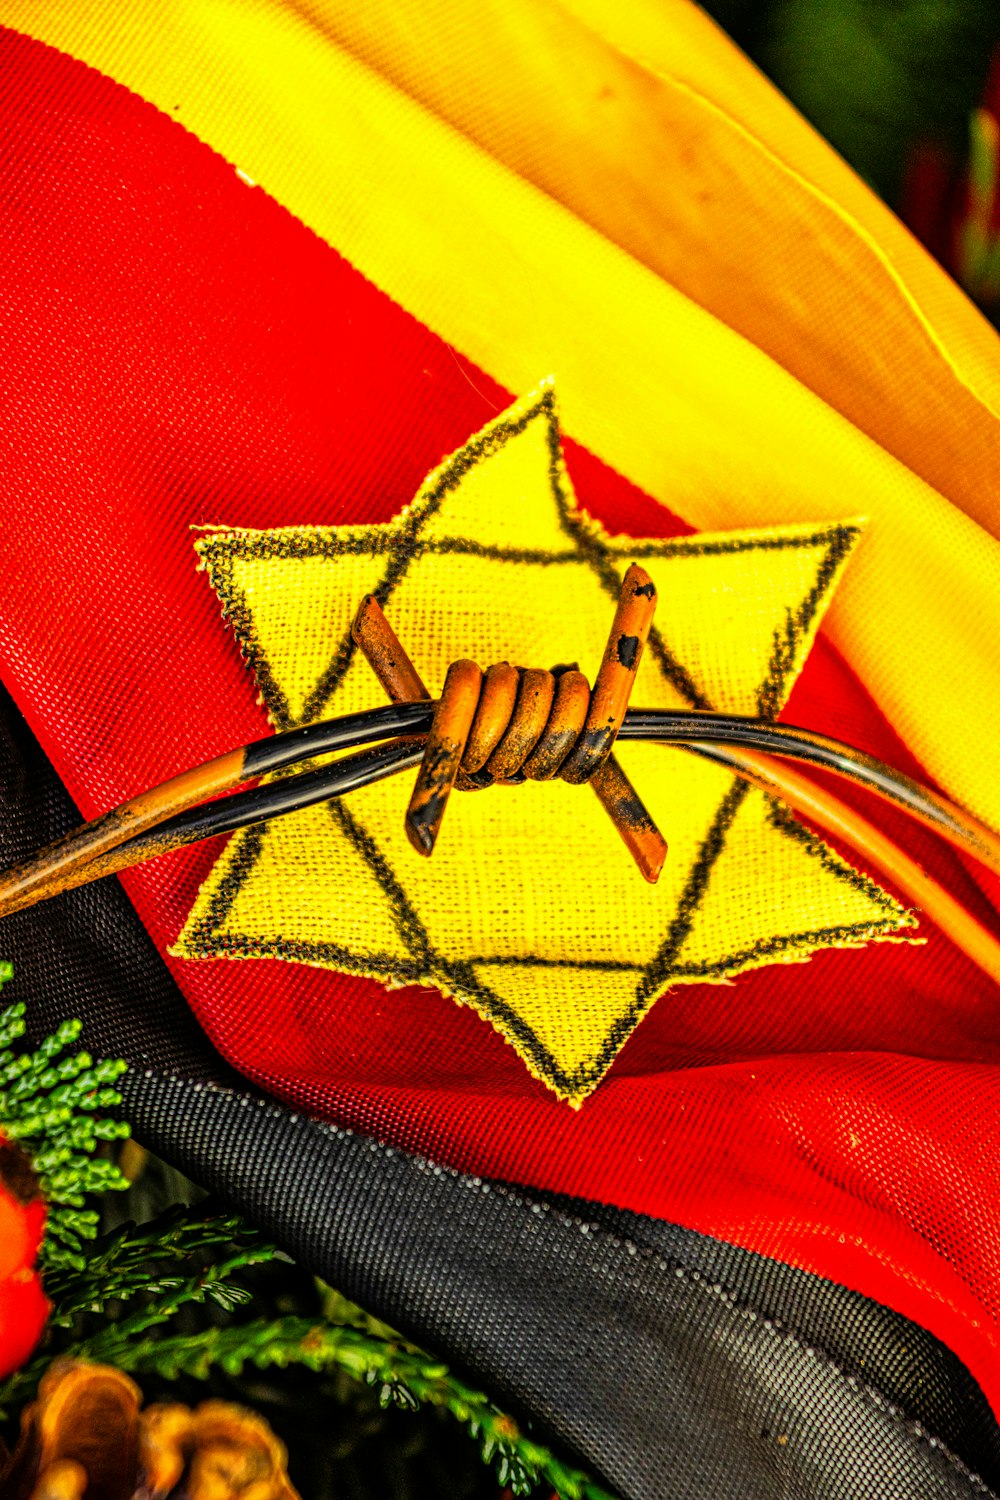 a red and yellow umbrella with a yellow star on it